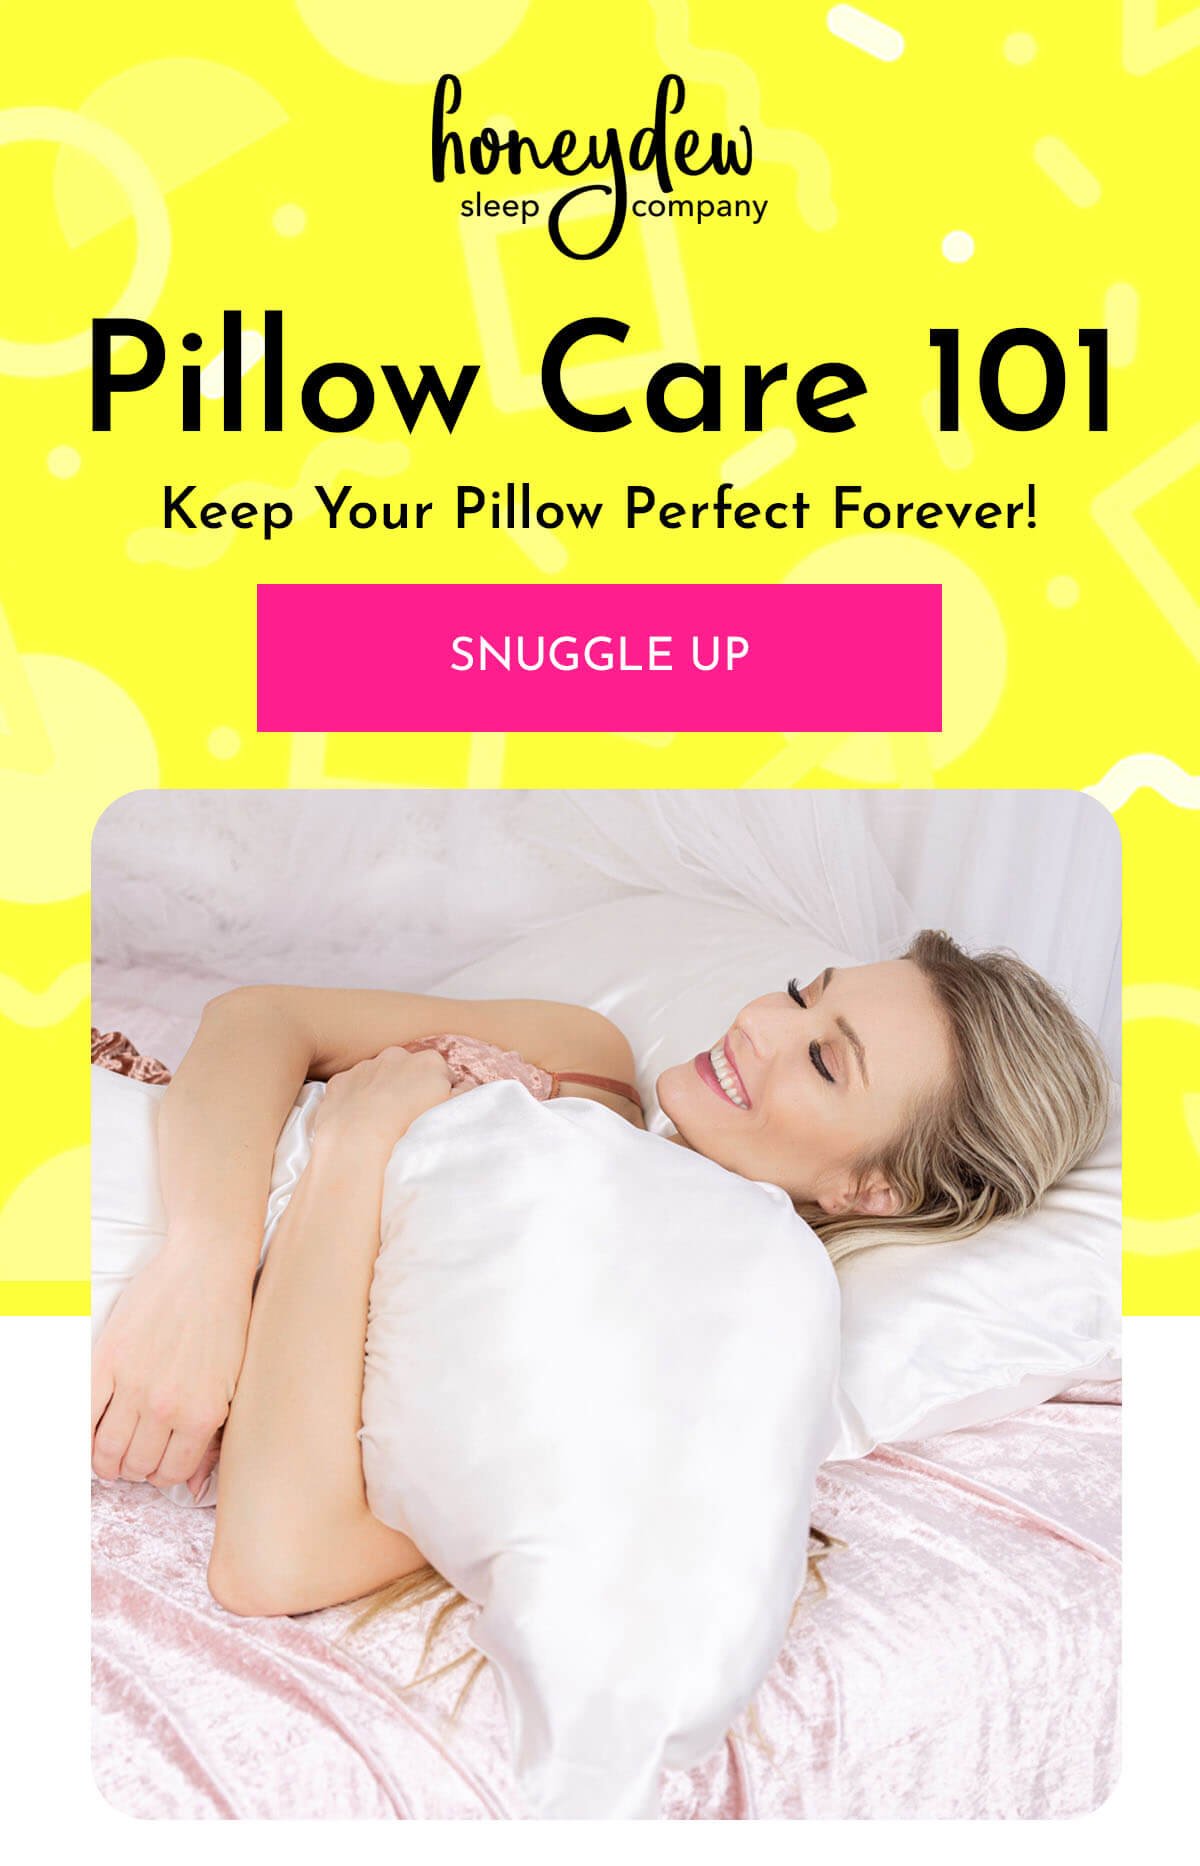 Keep Your Pillow Perfect Forever!